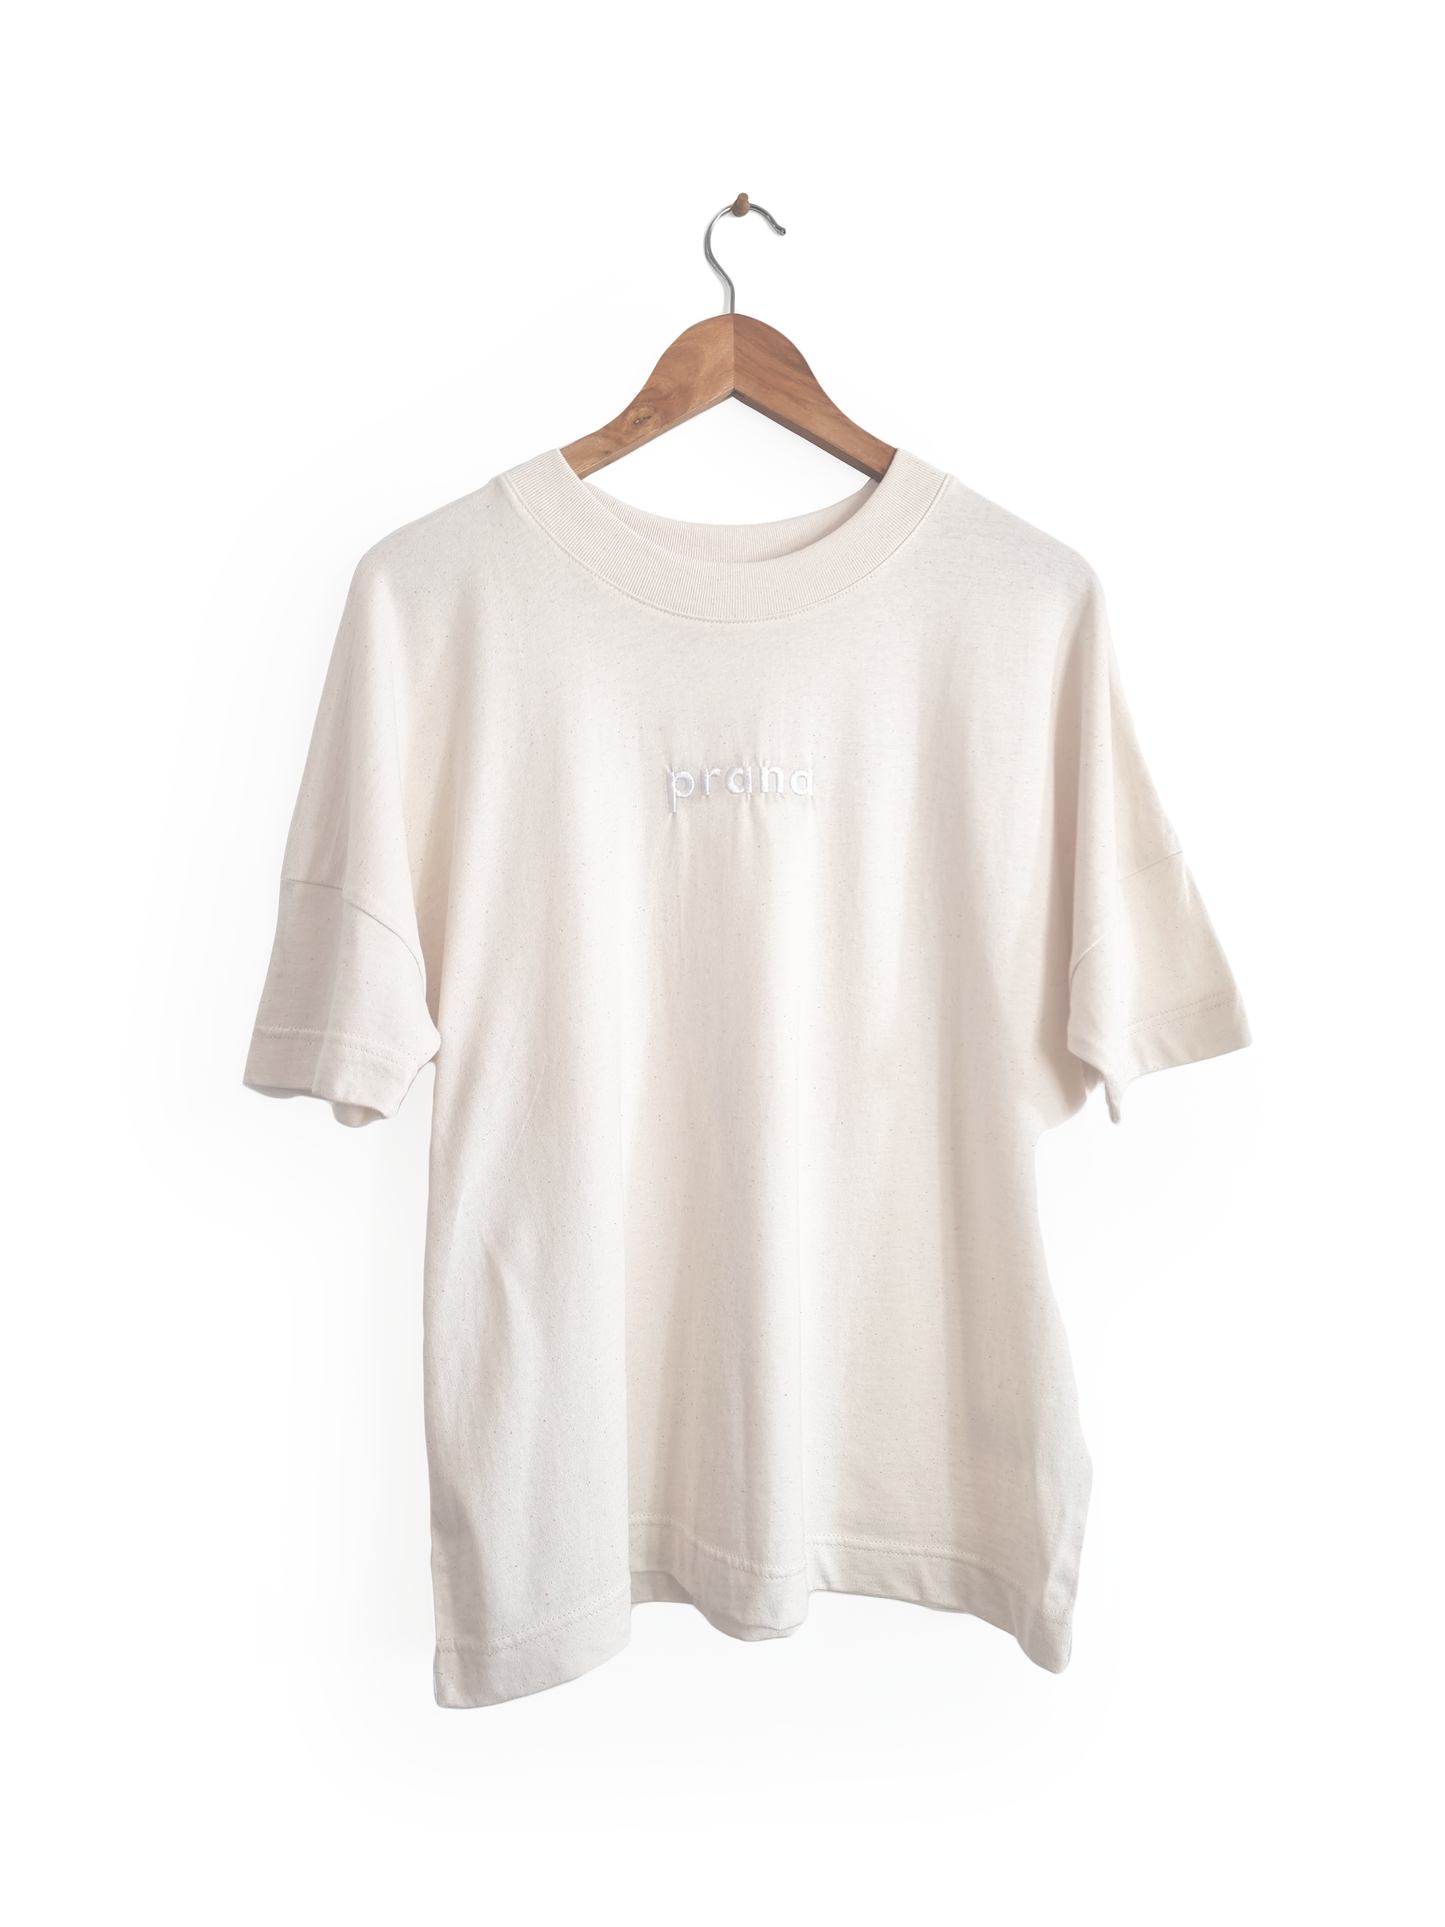 Ethical and sustainable, natural raw organic cotton tee / t shirt with embroidered prana design for yoga, gym, or lounge.